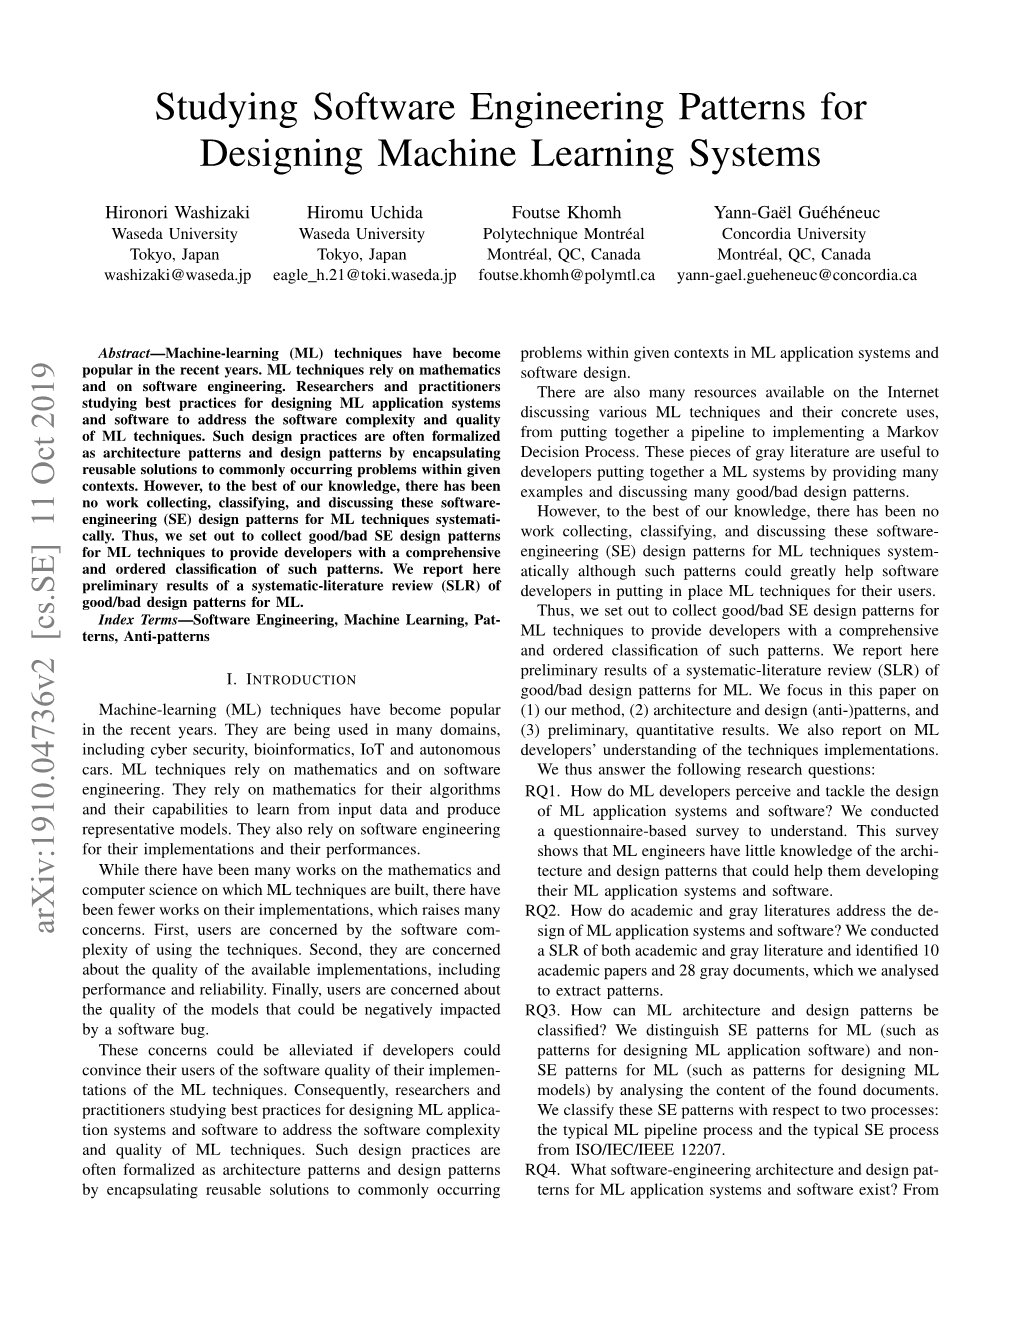 Studying Software Engineering Patterns for Designing Machine Learning Systems